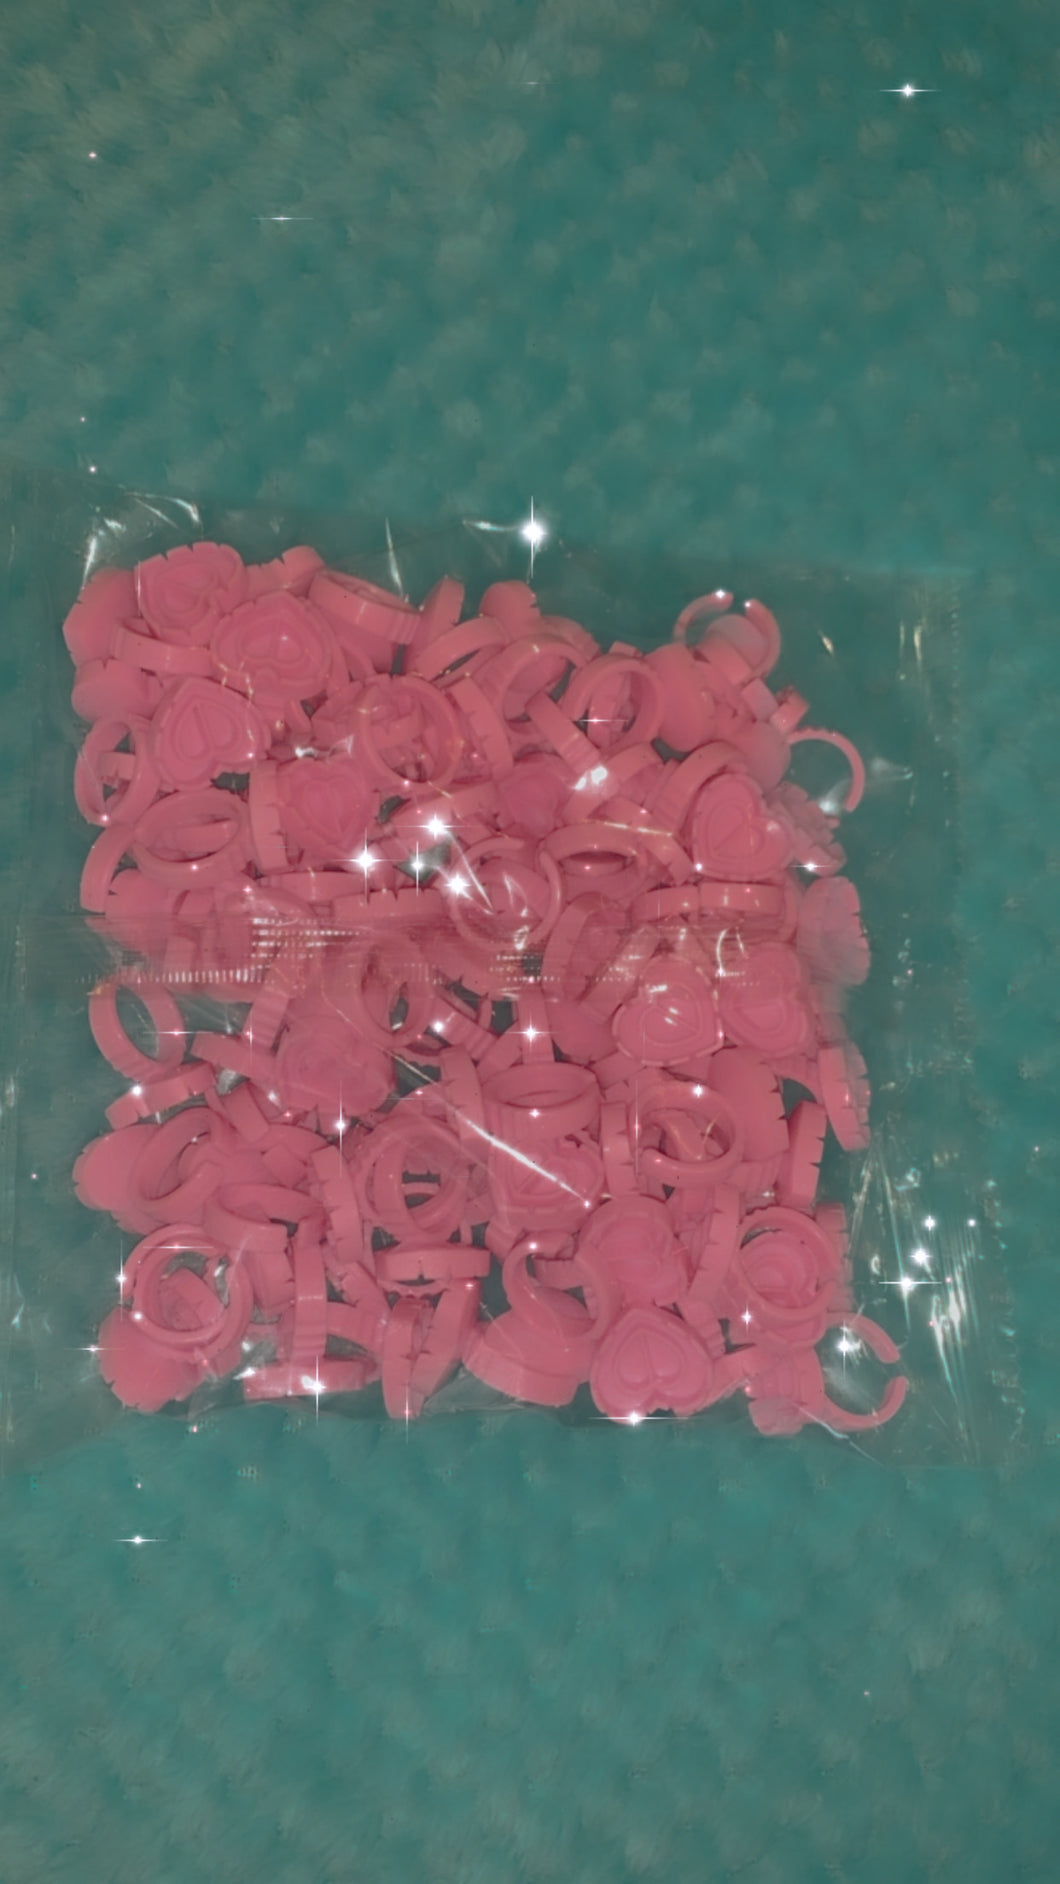 Pink heart shaped glue rings 💗